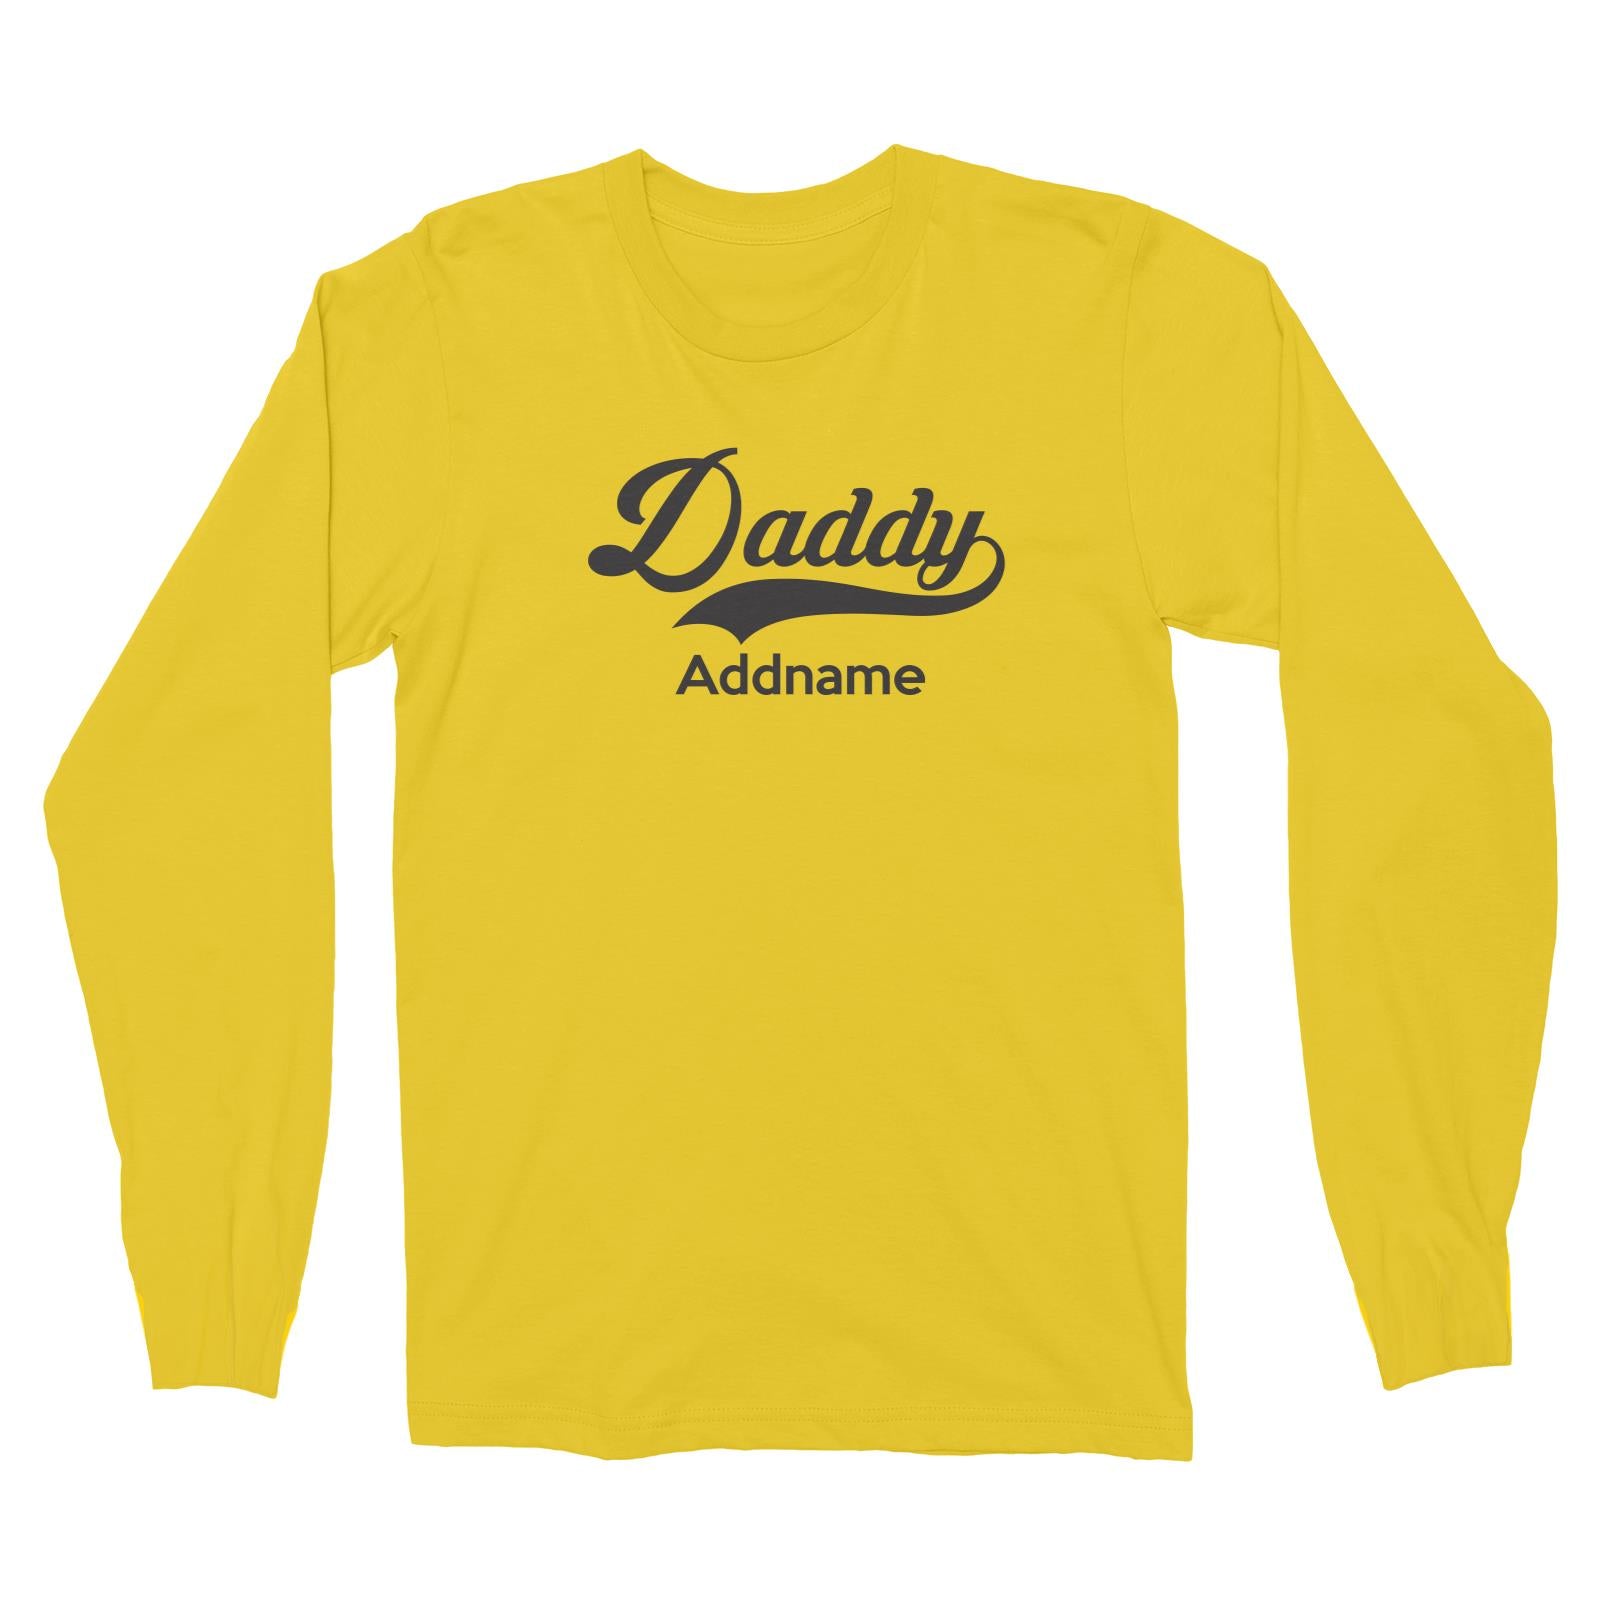 Retro Daddy Addname Long Sleeve Unisex T-Shirt  Matching Family Personalizable Designs